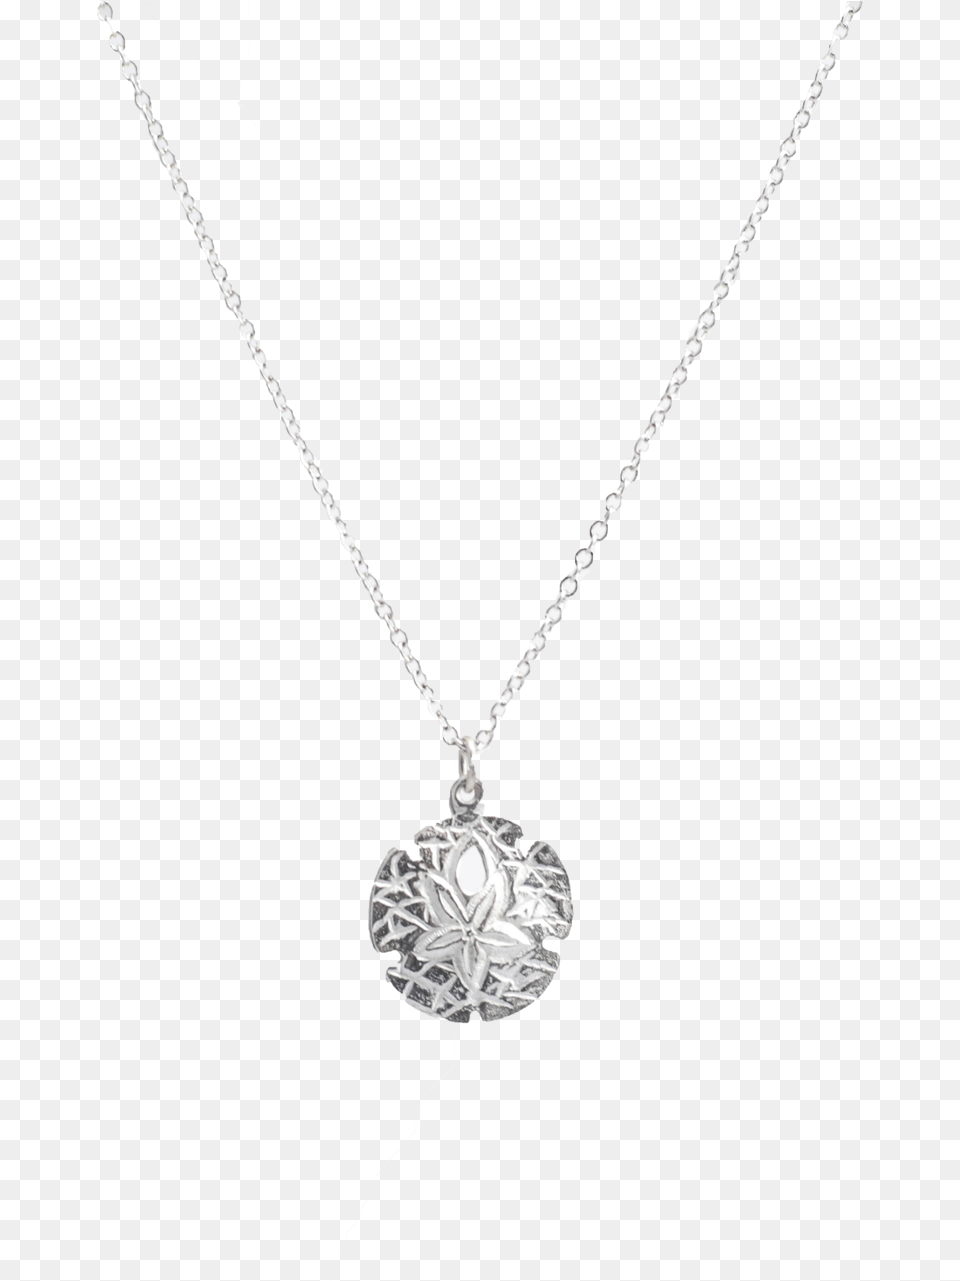 Small Sand Dollar Necklace Necklace, Accessories, Jewelry, Pendant, Locket Png